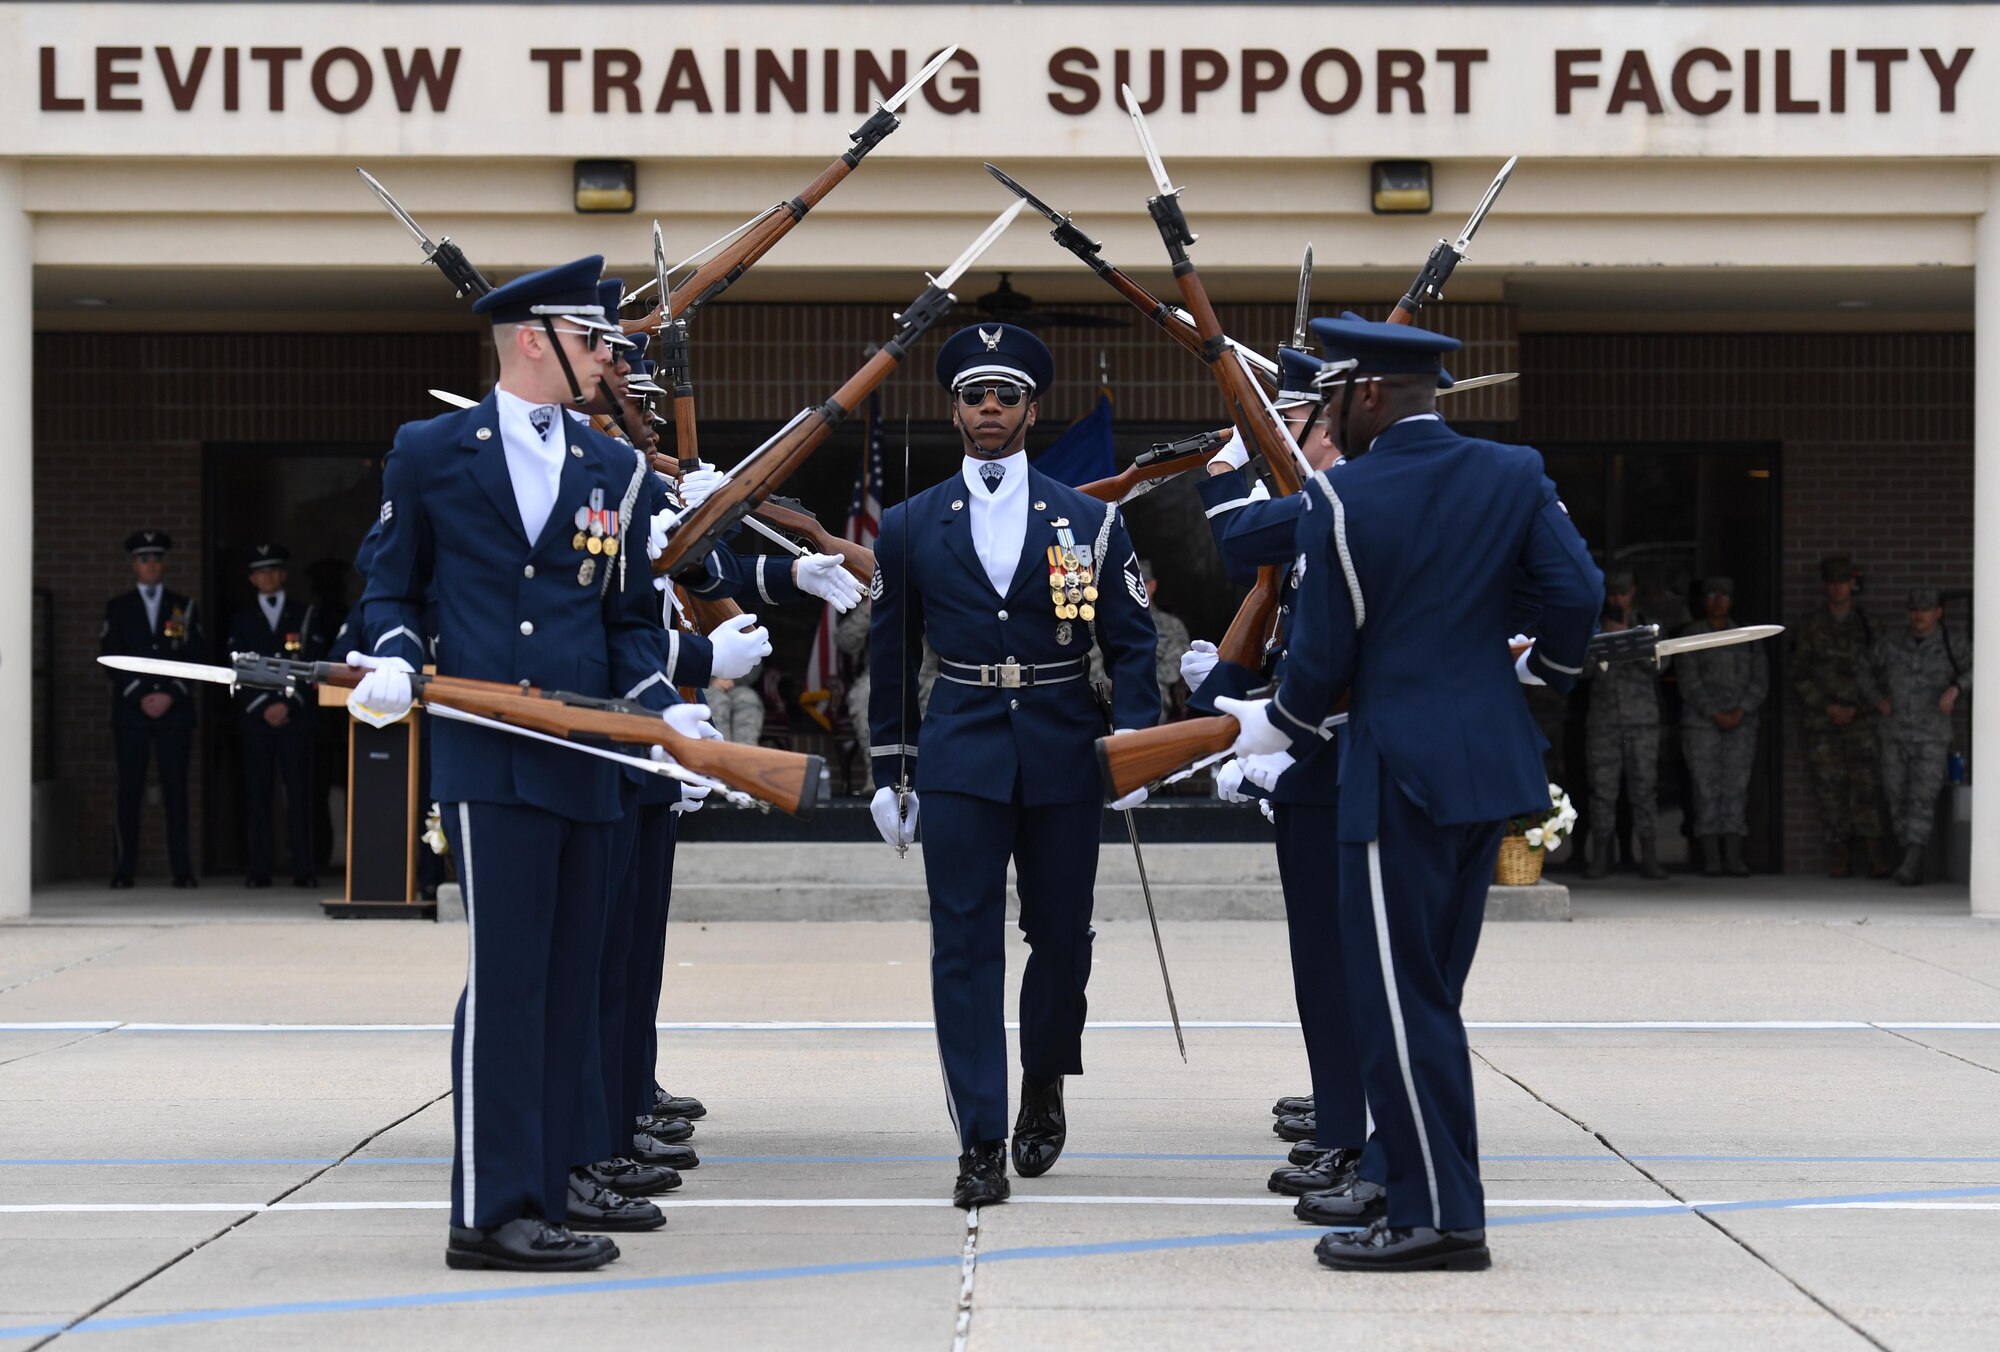 The U.S. Air Force Honor Guard Drill Team debuts their 2019 routine in front of Keesler leadership and 81st Training Group Airmen on the Levitow Training Support Facility drill pad at Keesler Air Force Base, Mississippi, Feb. 8, 2019. The team comes to Keesler every year for five weeks to develop a new routine that they will use throughout the year. (U.S. Air Force photo by Kemberly Groue)